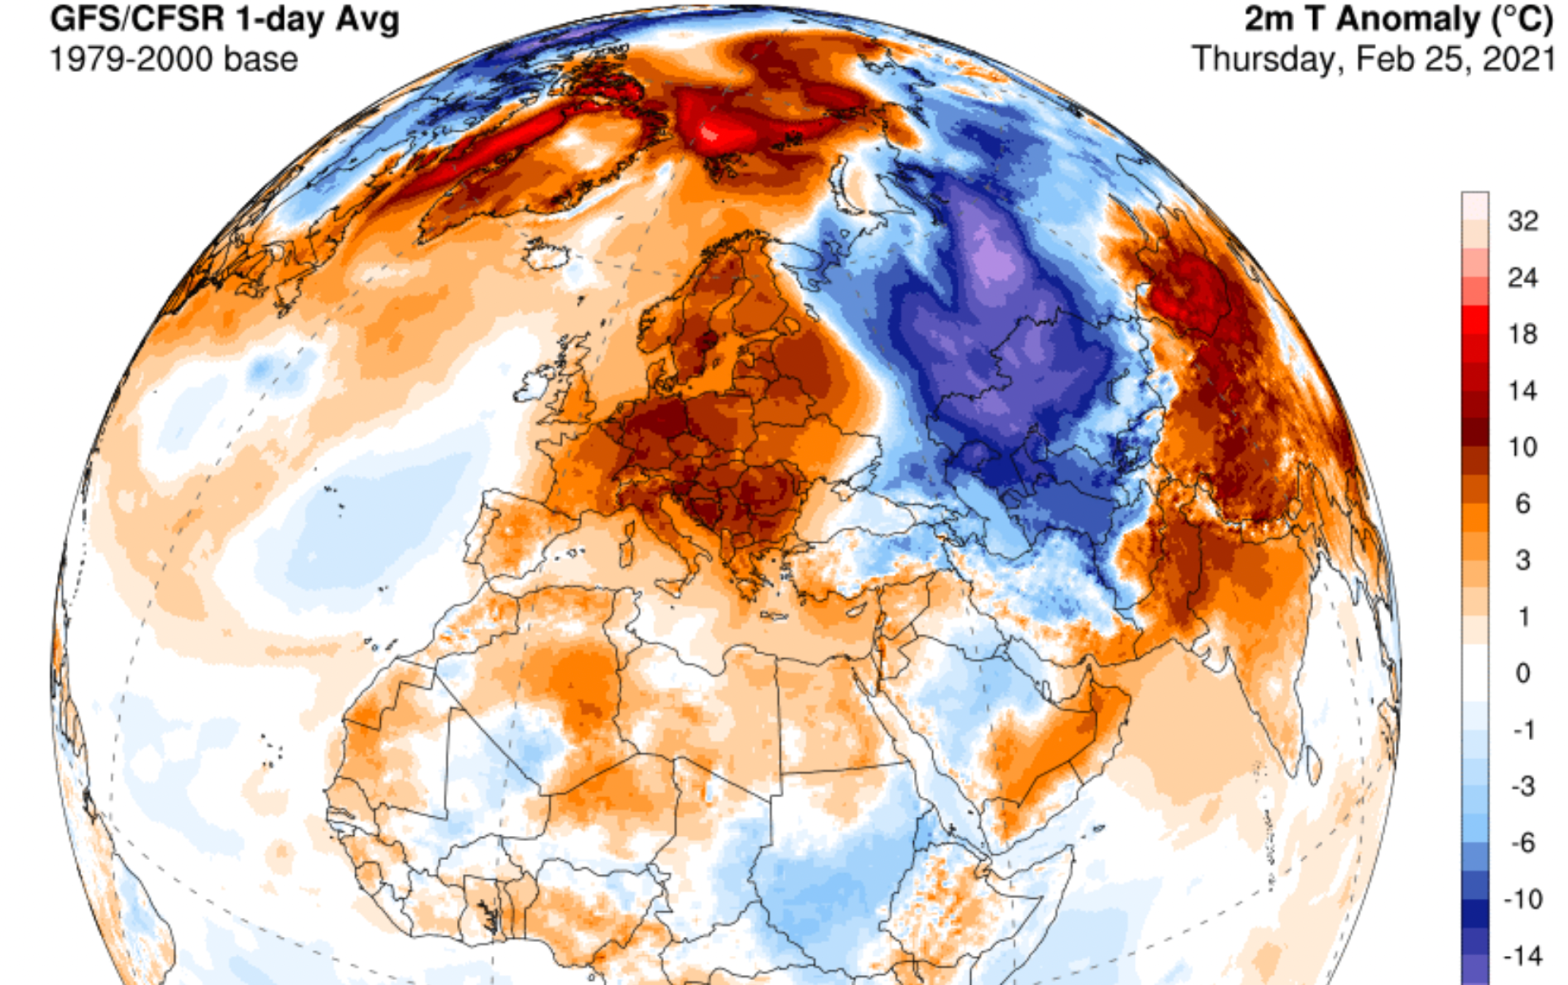 A temperature anomaly maps shows heat over Europe and the Arctic and a chill over Russia. (Image: University of Maine)